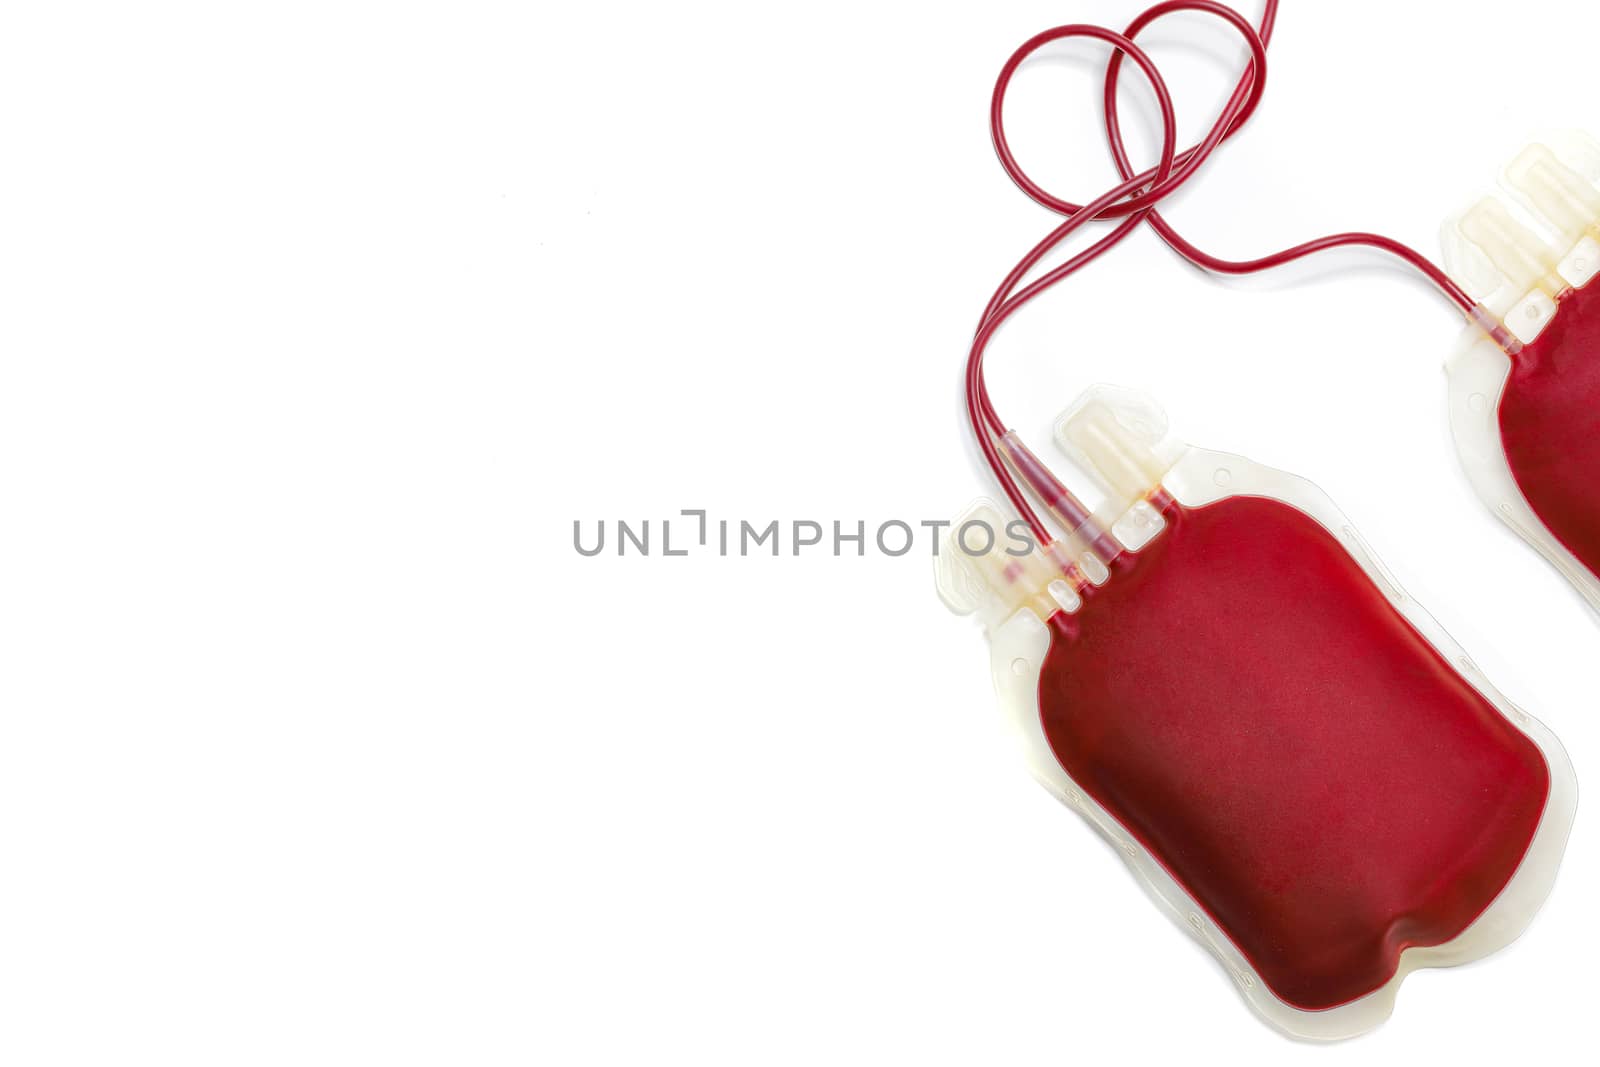 two blood bags on white background, blood donation concept